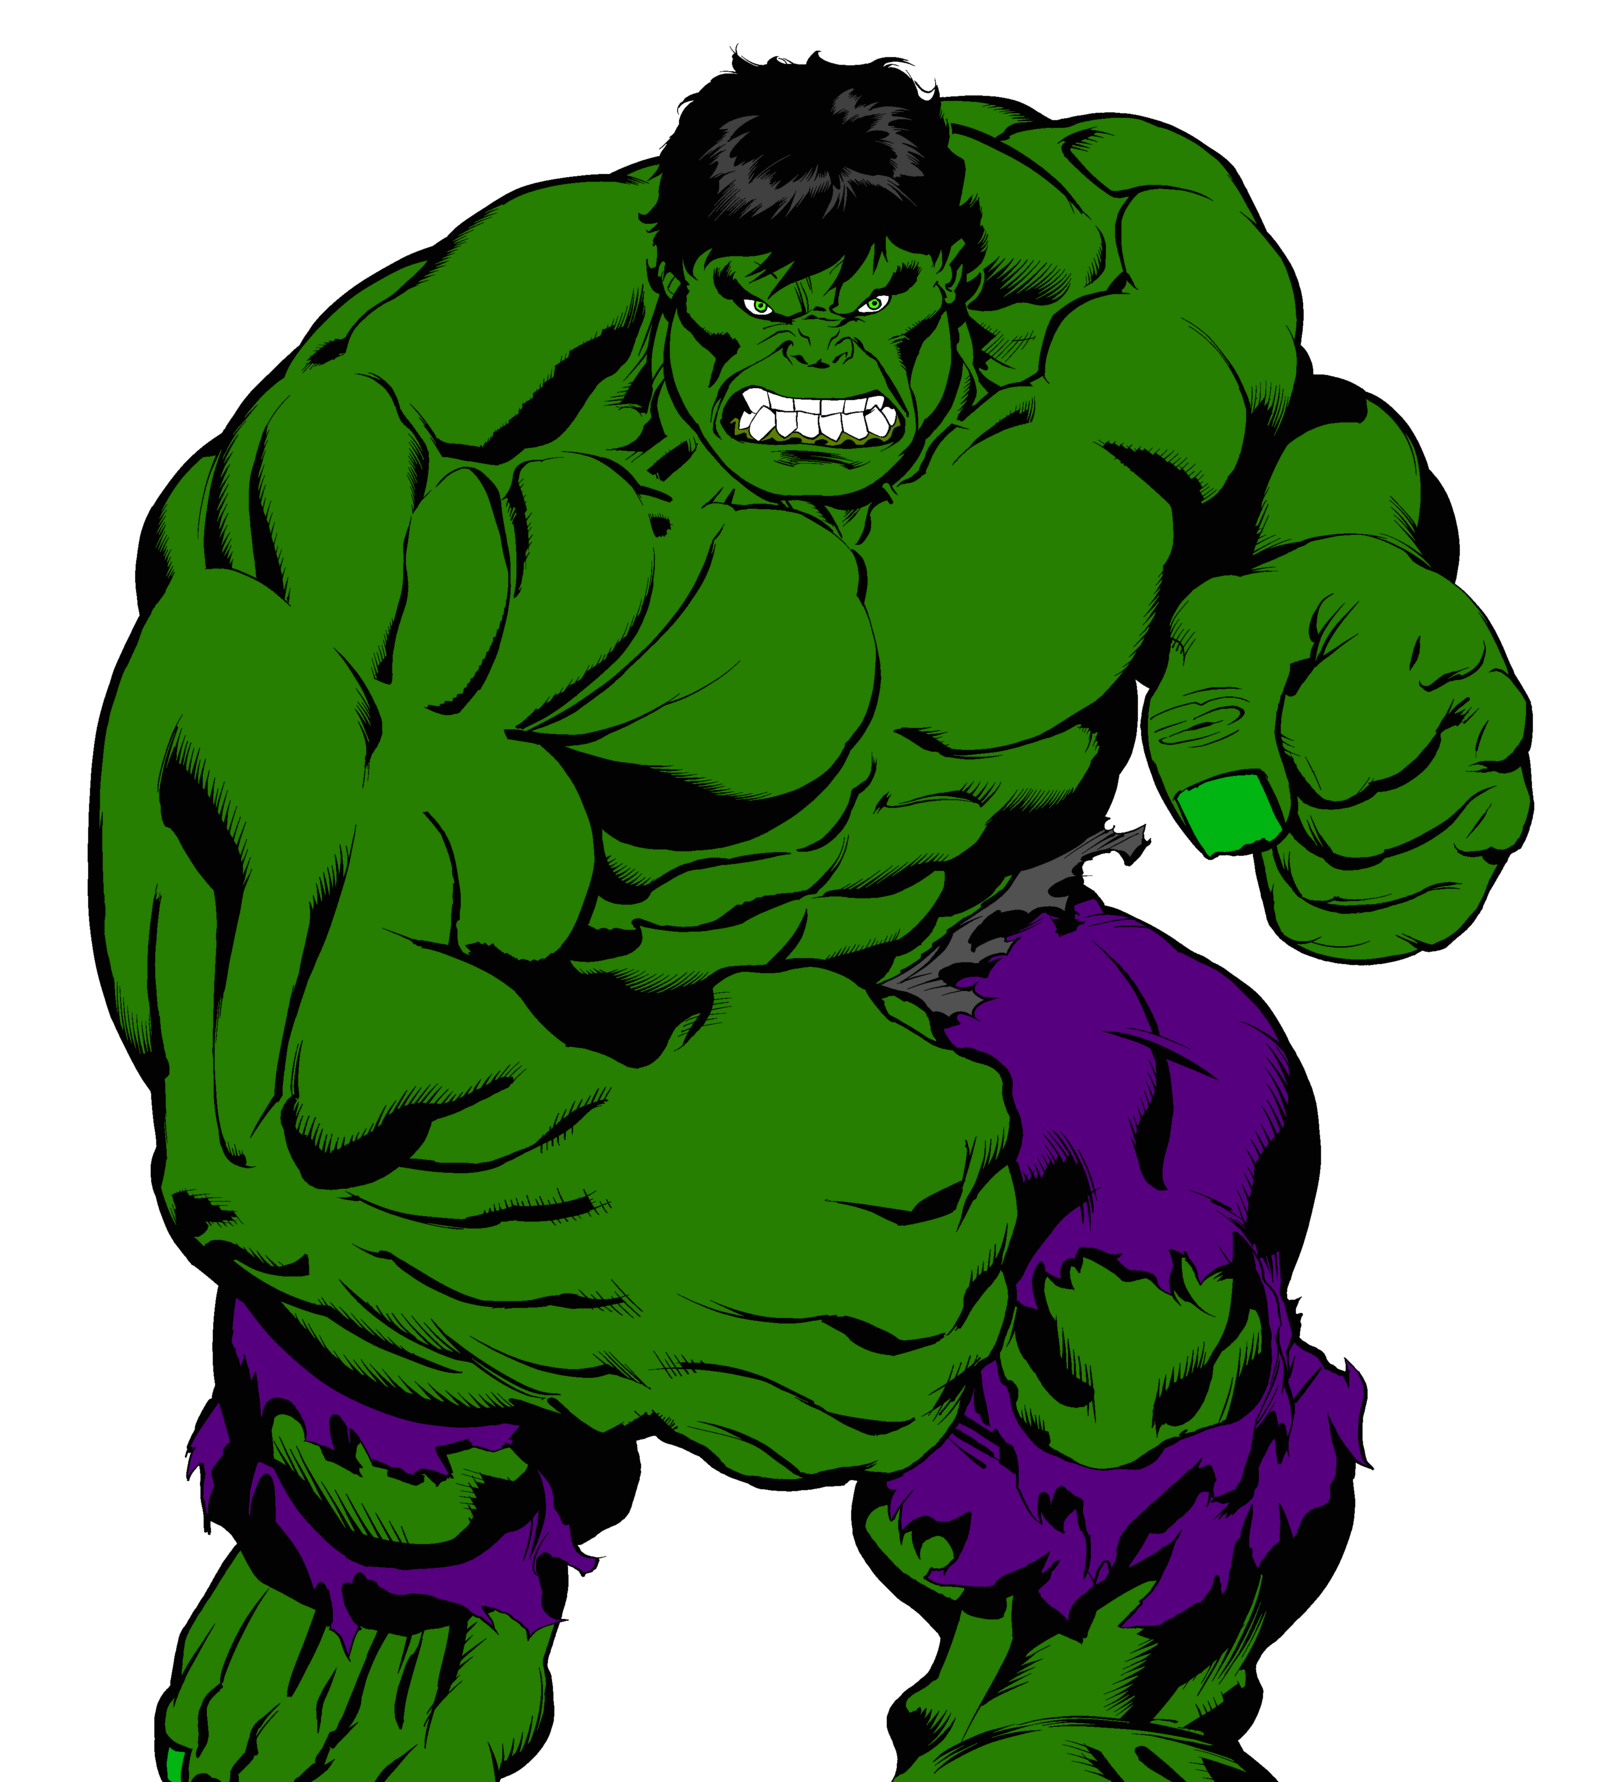 Hulk screenshots, images and pictures - Comic Vine